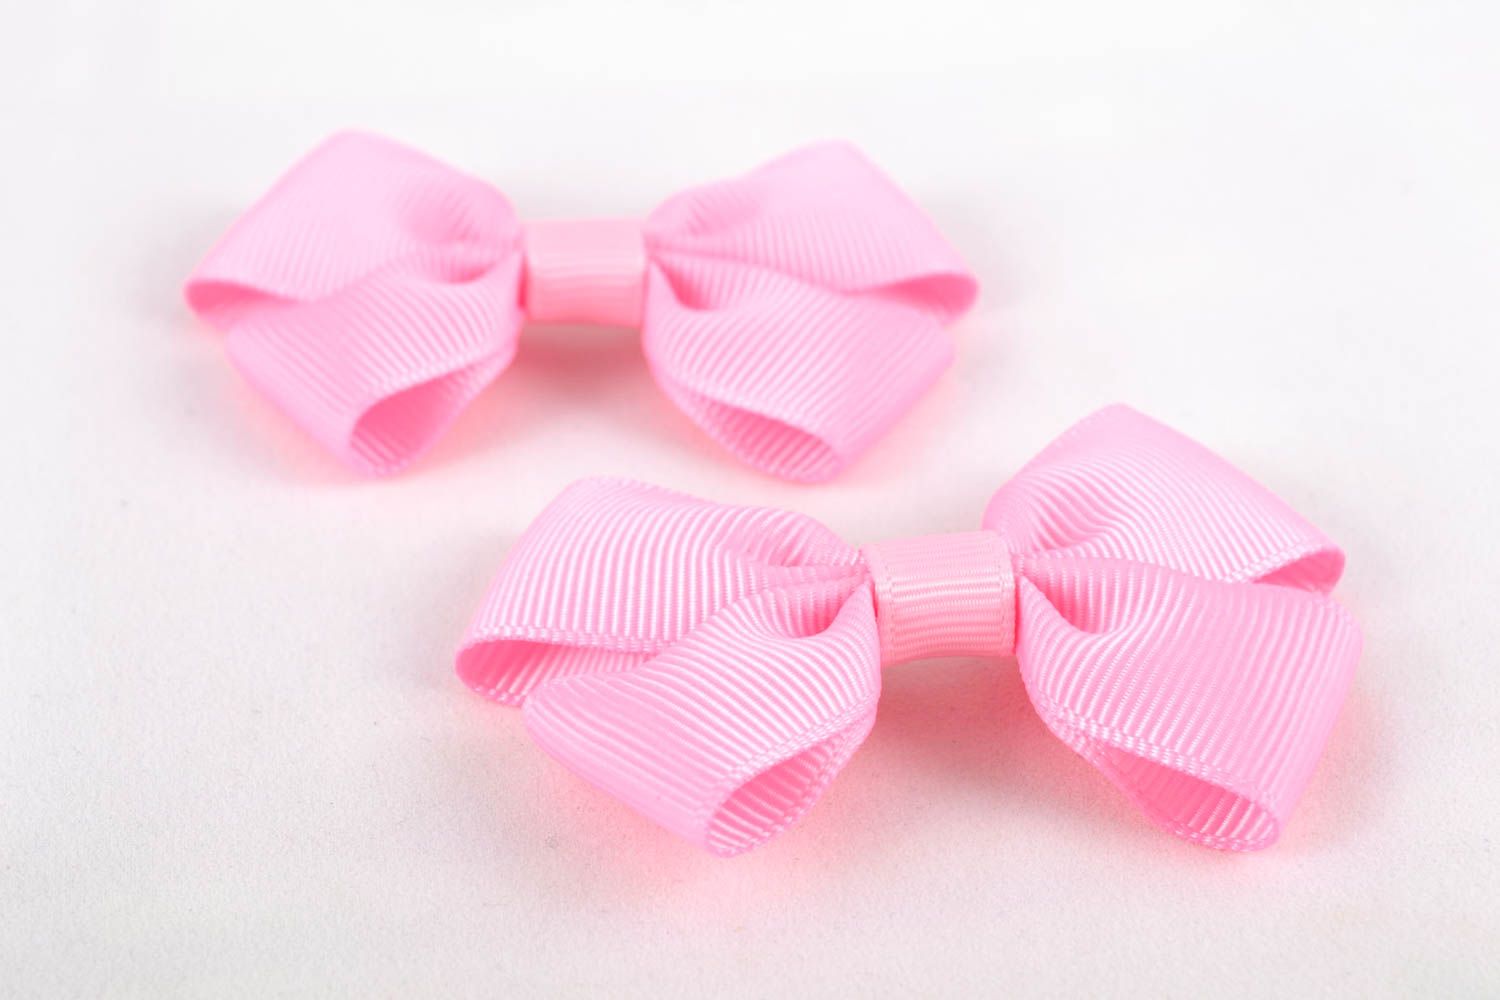 Unusual handmade textile bows hair bow brooch jewelry jewelry making supplies photo 3